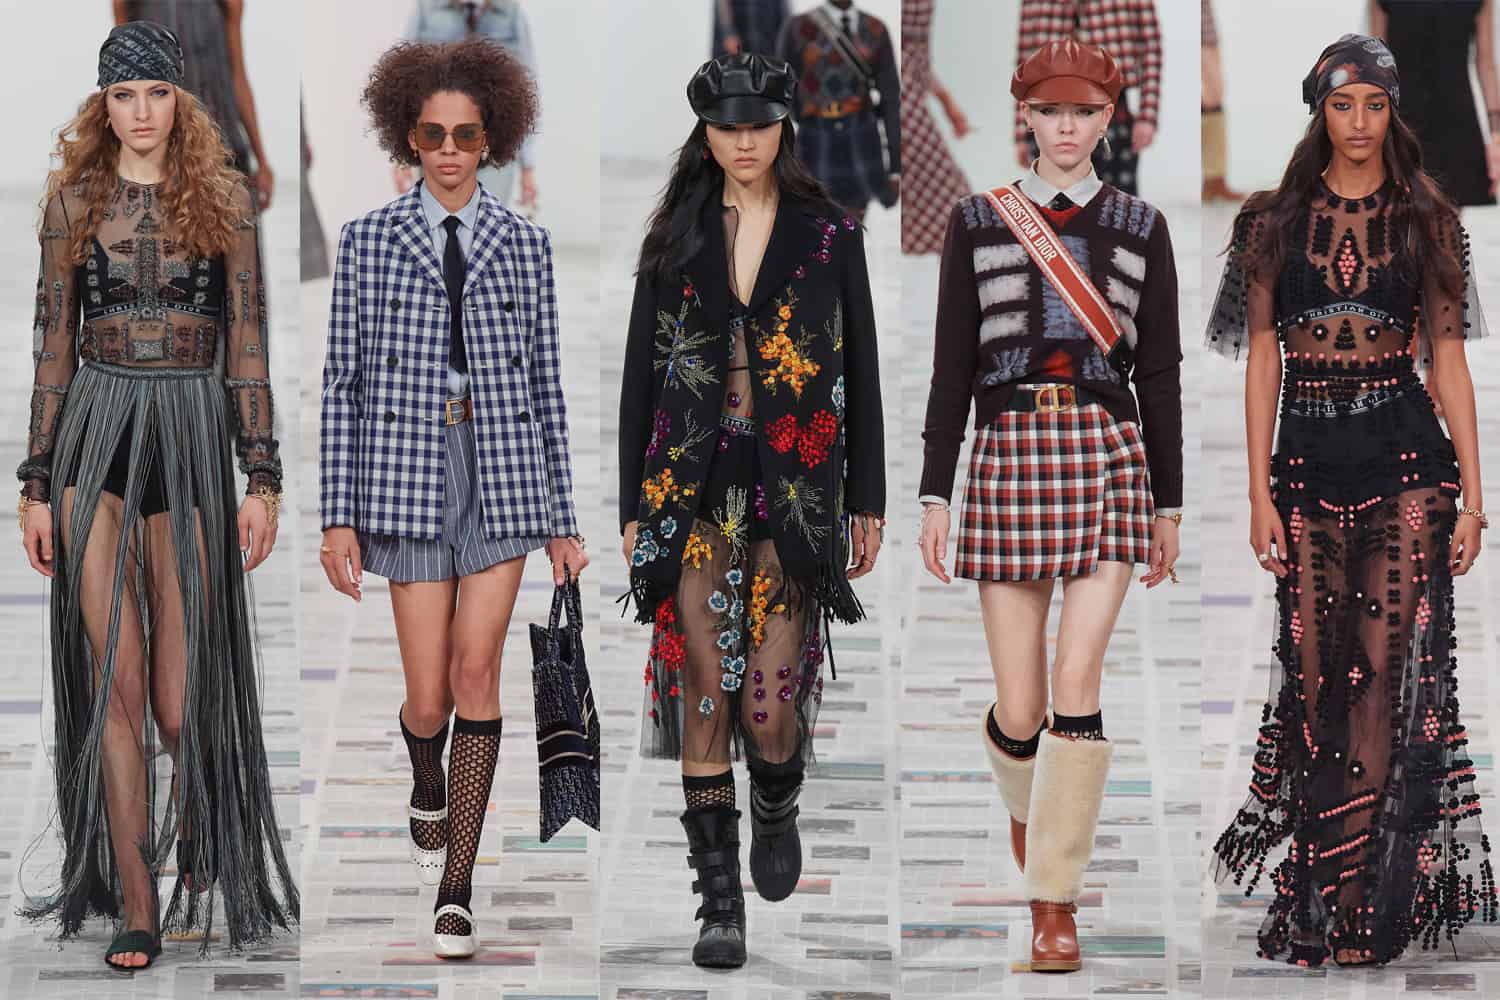 Paris Fashion Week is In Full Swing With the Dior Fall 2020 Show